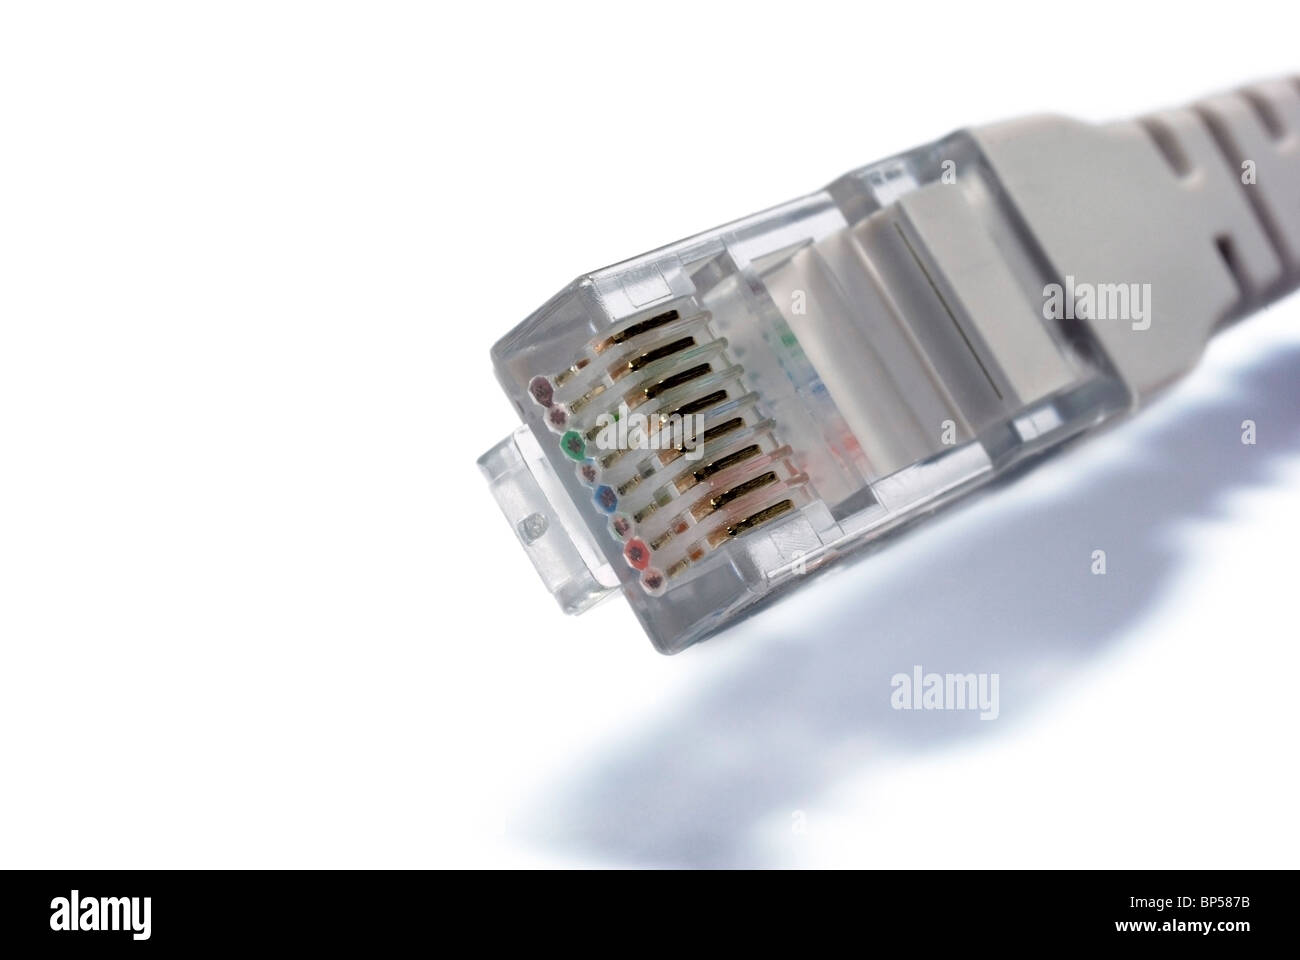 RJ45 connector of UTP cable closeup on white background Stock Photo - Alamy